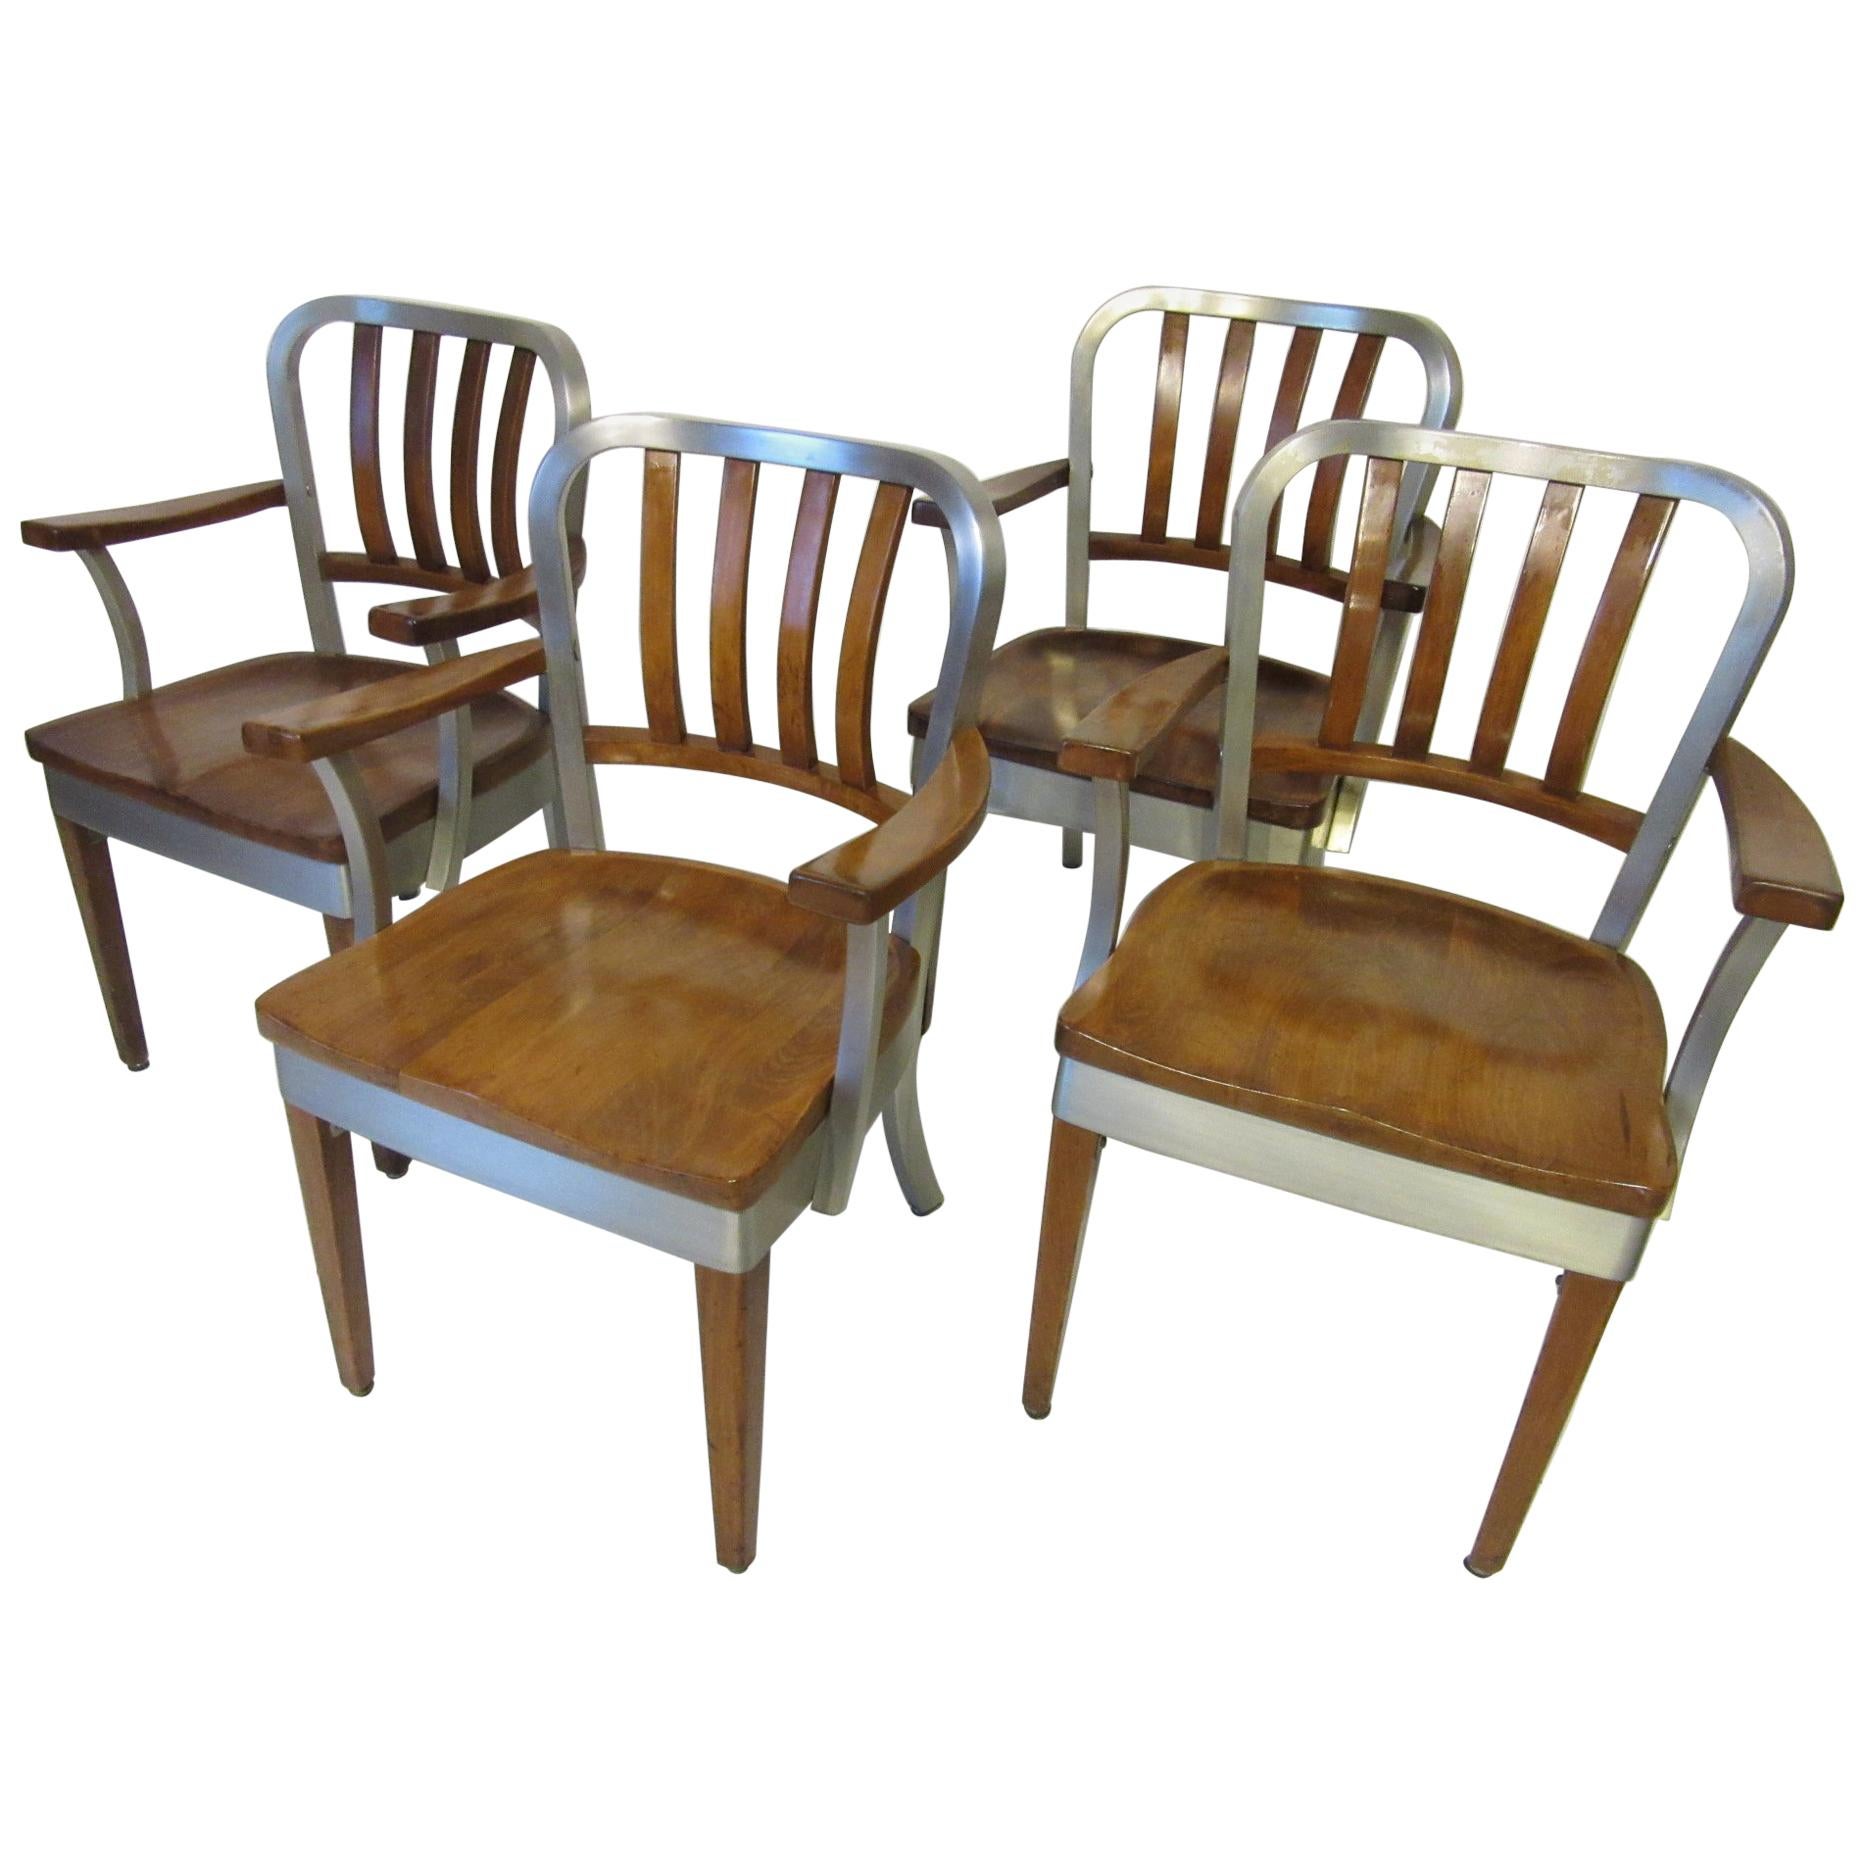 Shaw Walker Industrial Styled Dining or Office Armchairs